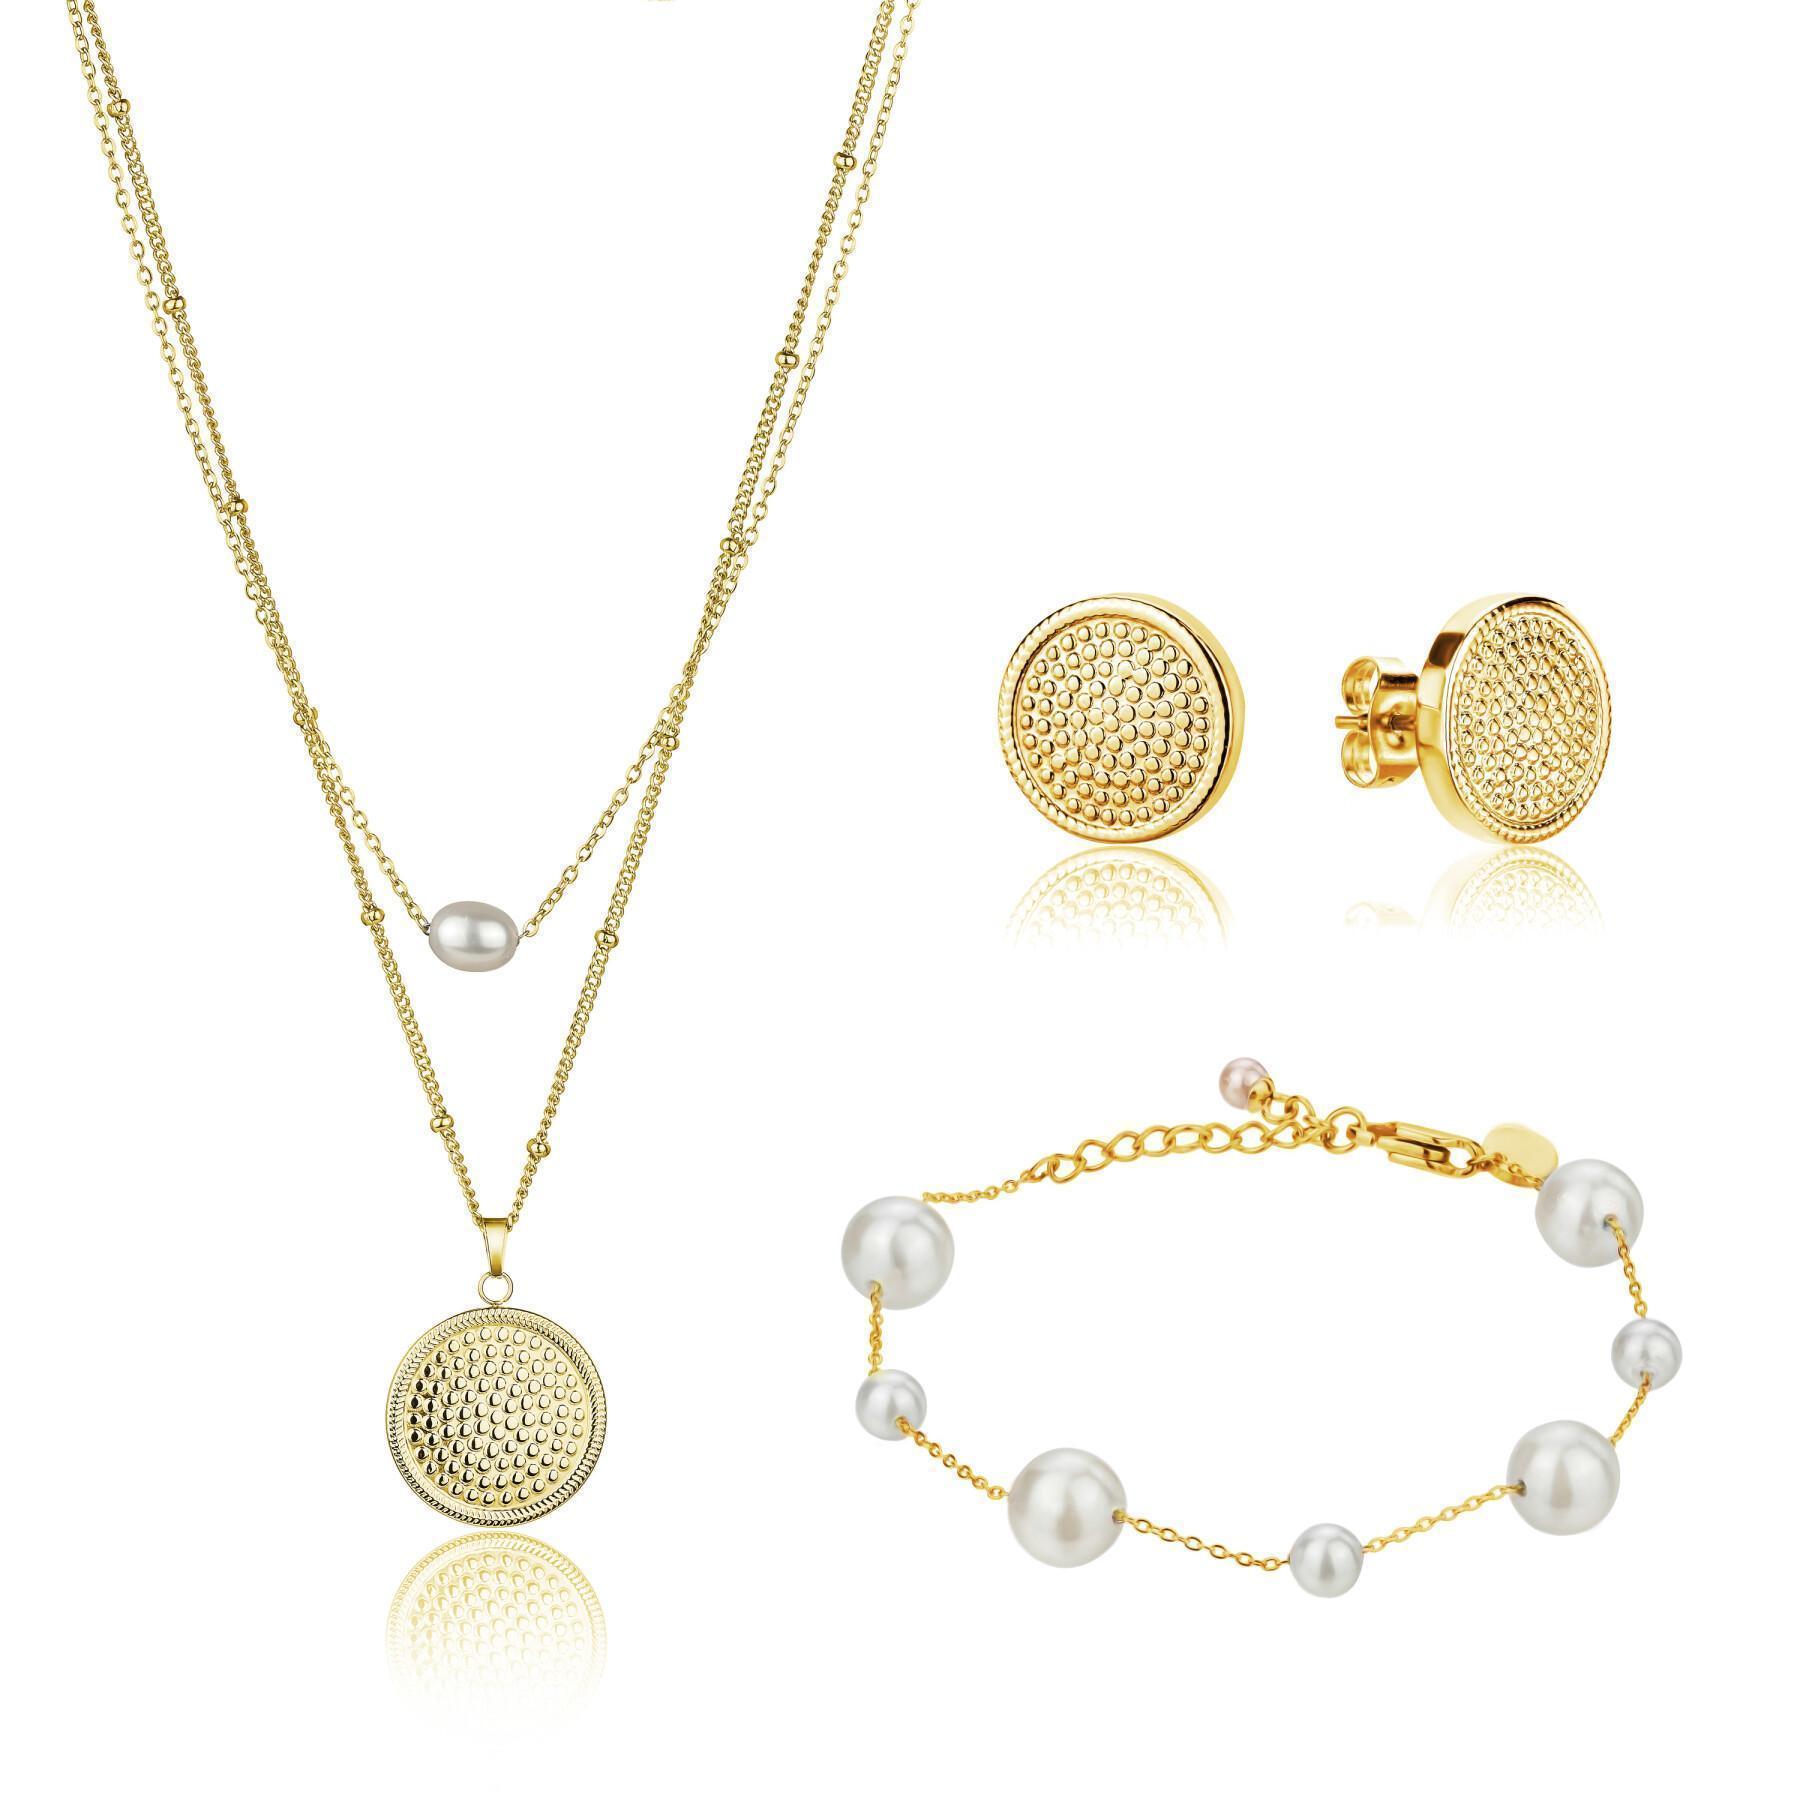 Necklace, bracelet and earrings set Isabella Ford Hilda Pearl